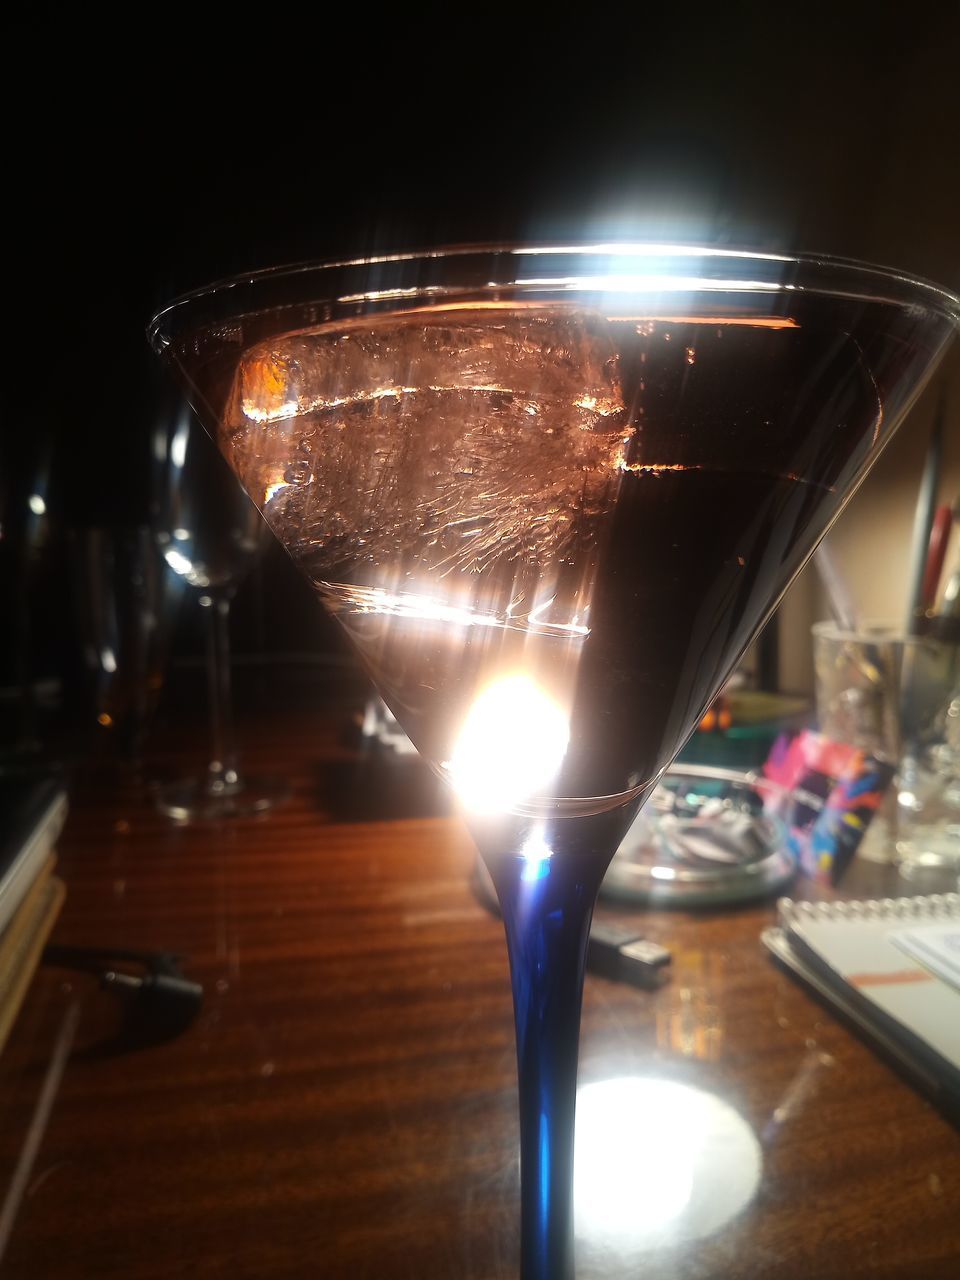 CLOSE-UP OF WINE GLASS ON TABLE IN RESTAURANT